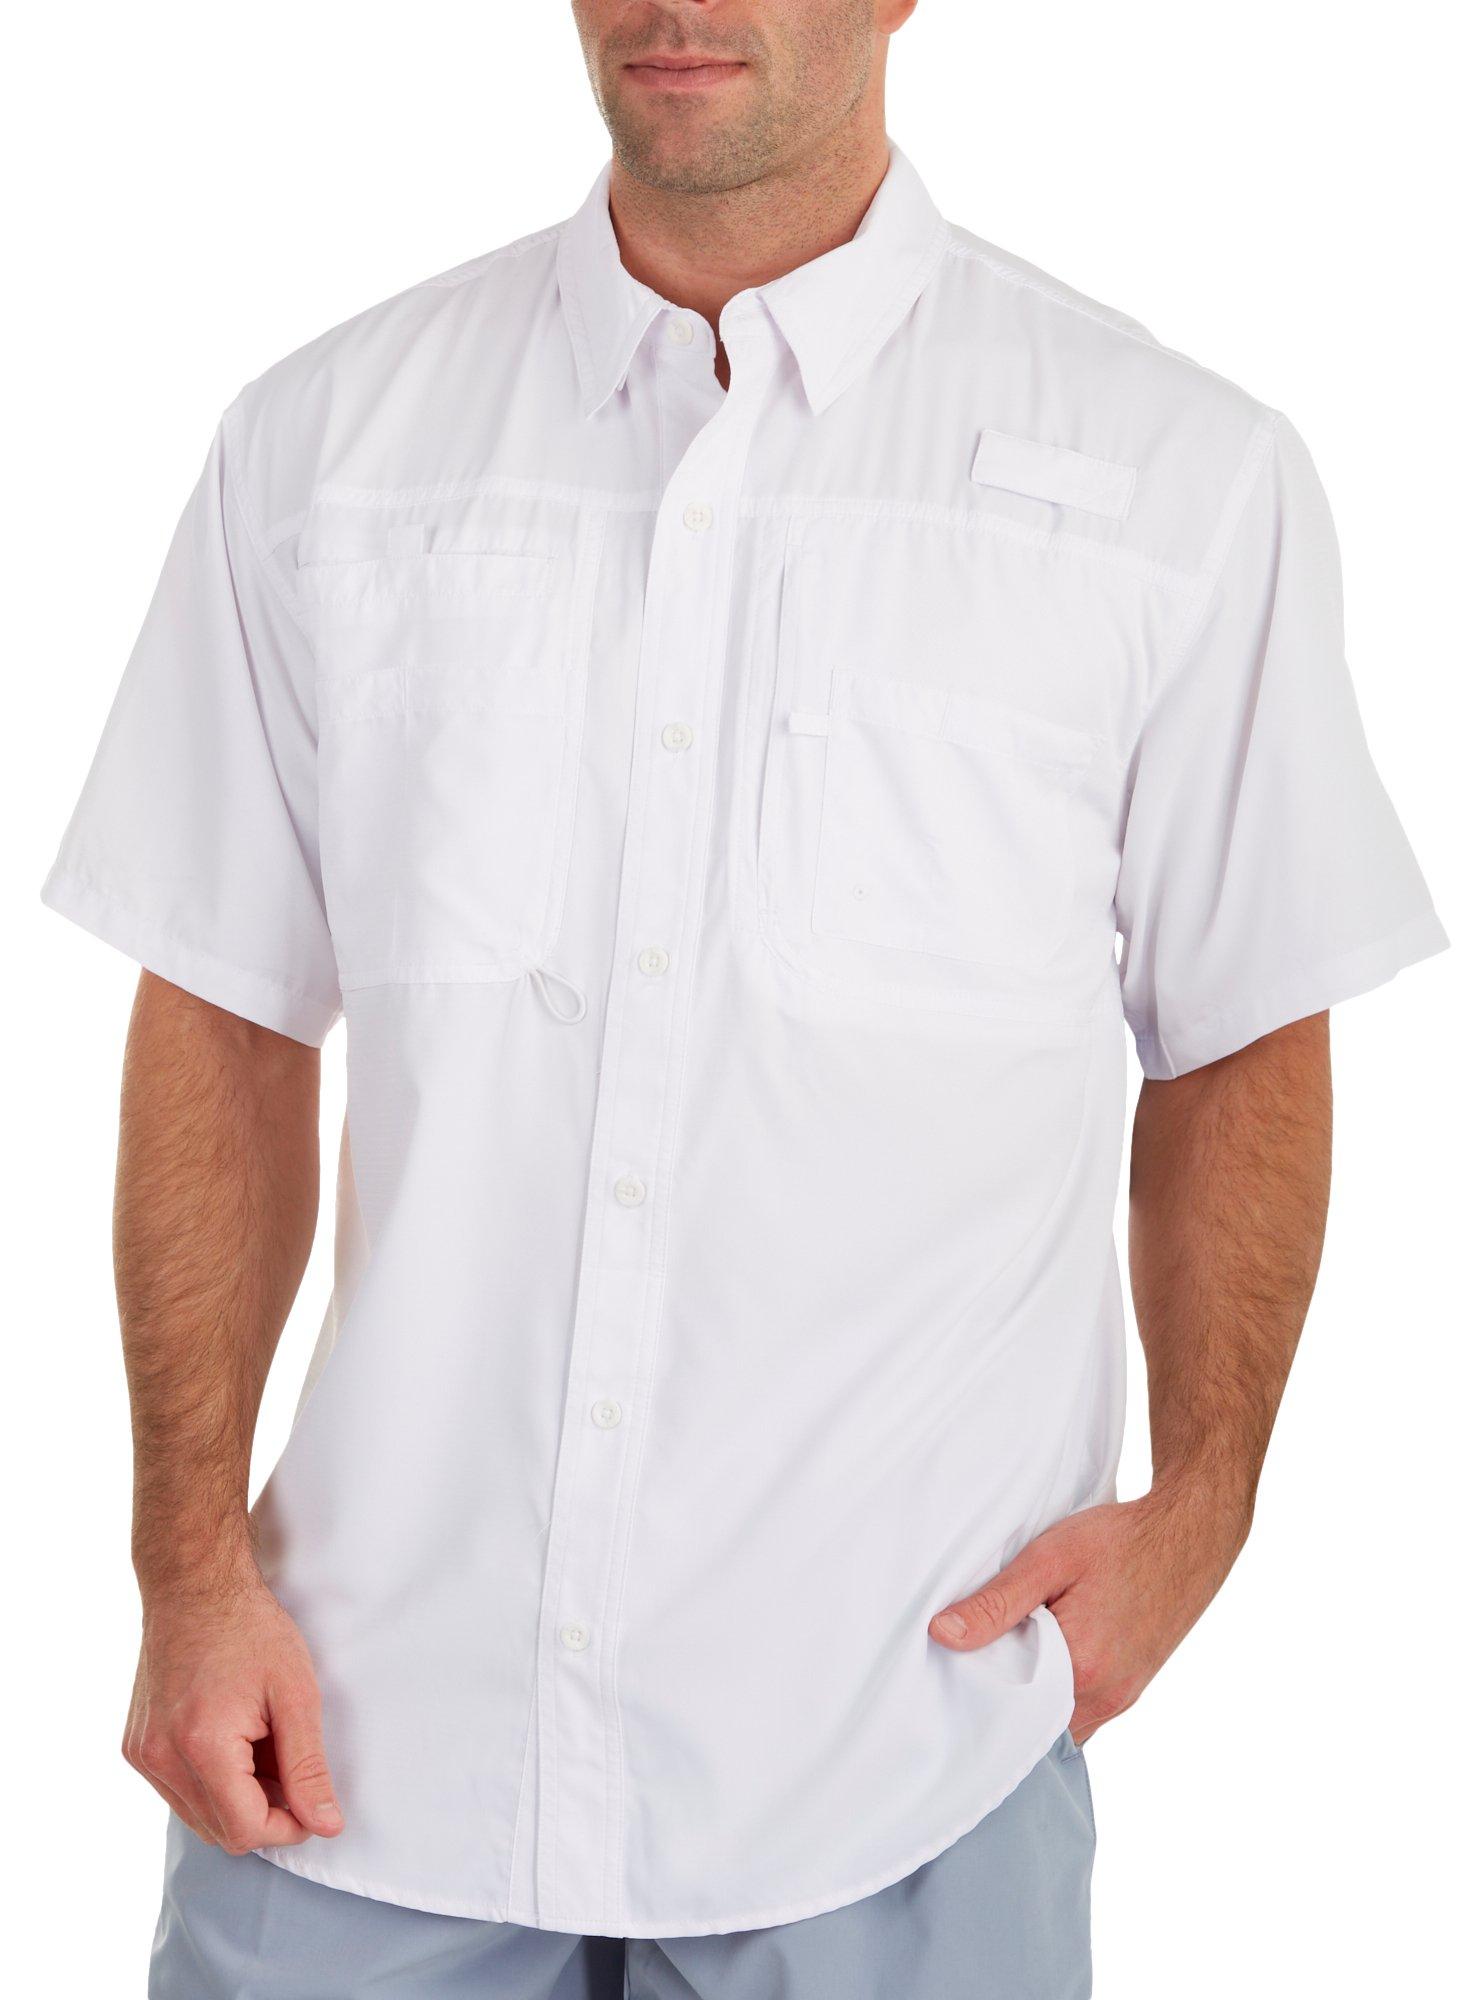 Reel Legends Mens Solid Saltwater II Short Sleeve Shirt - White - Small